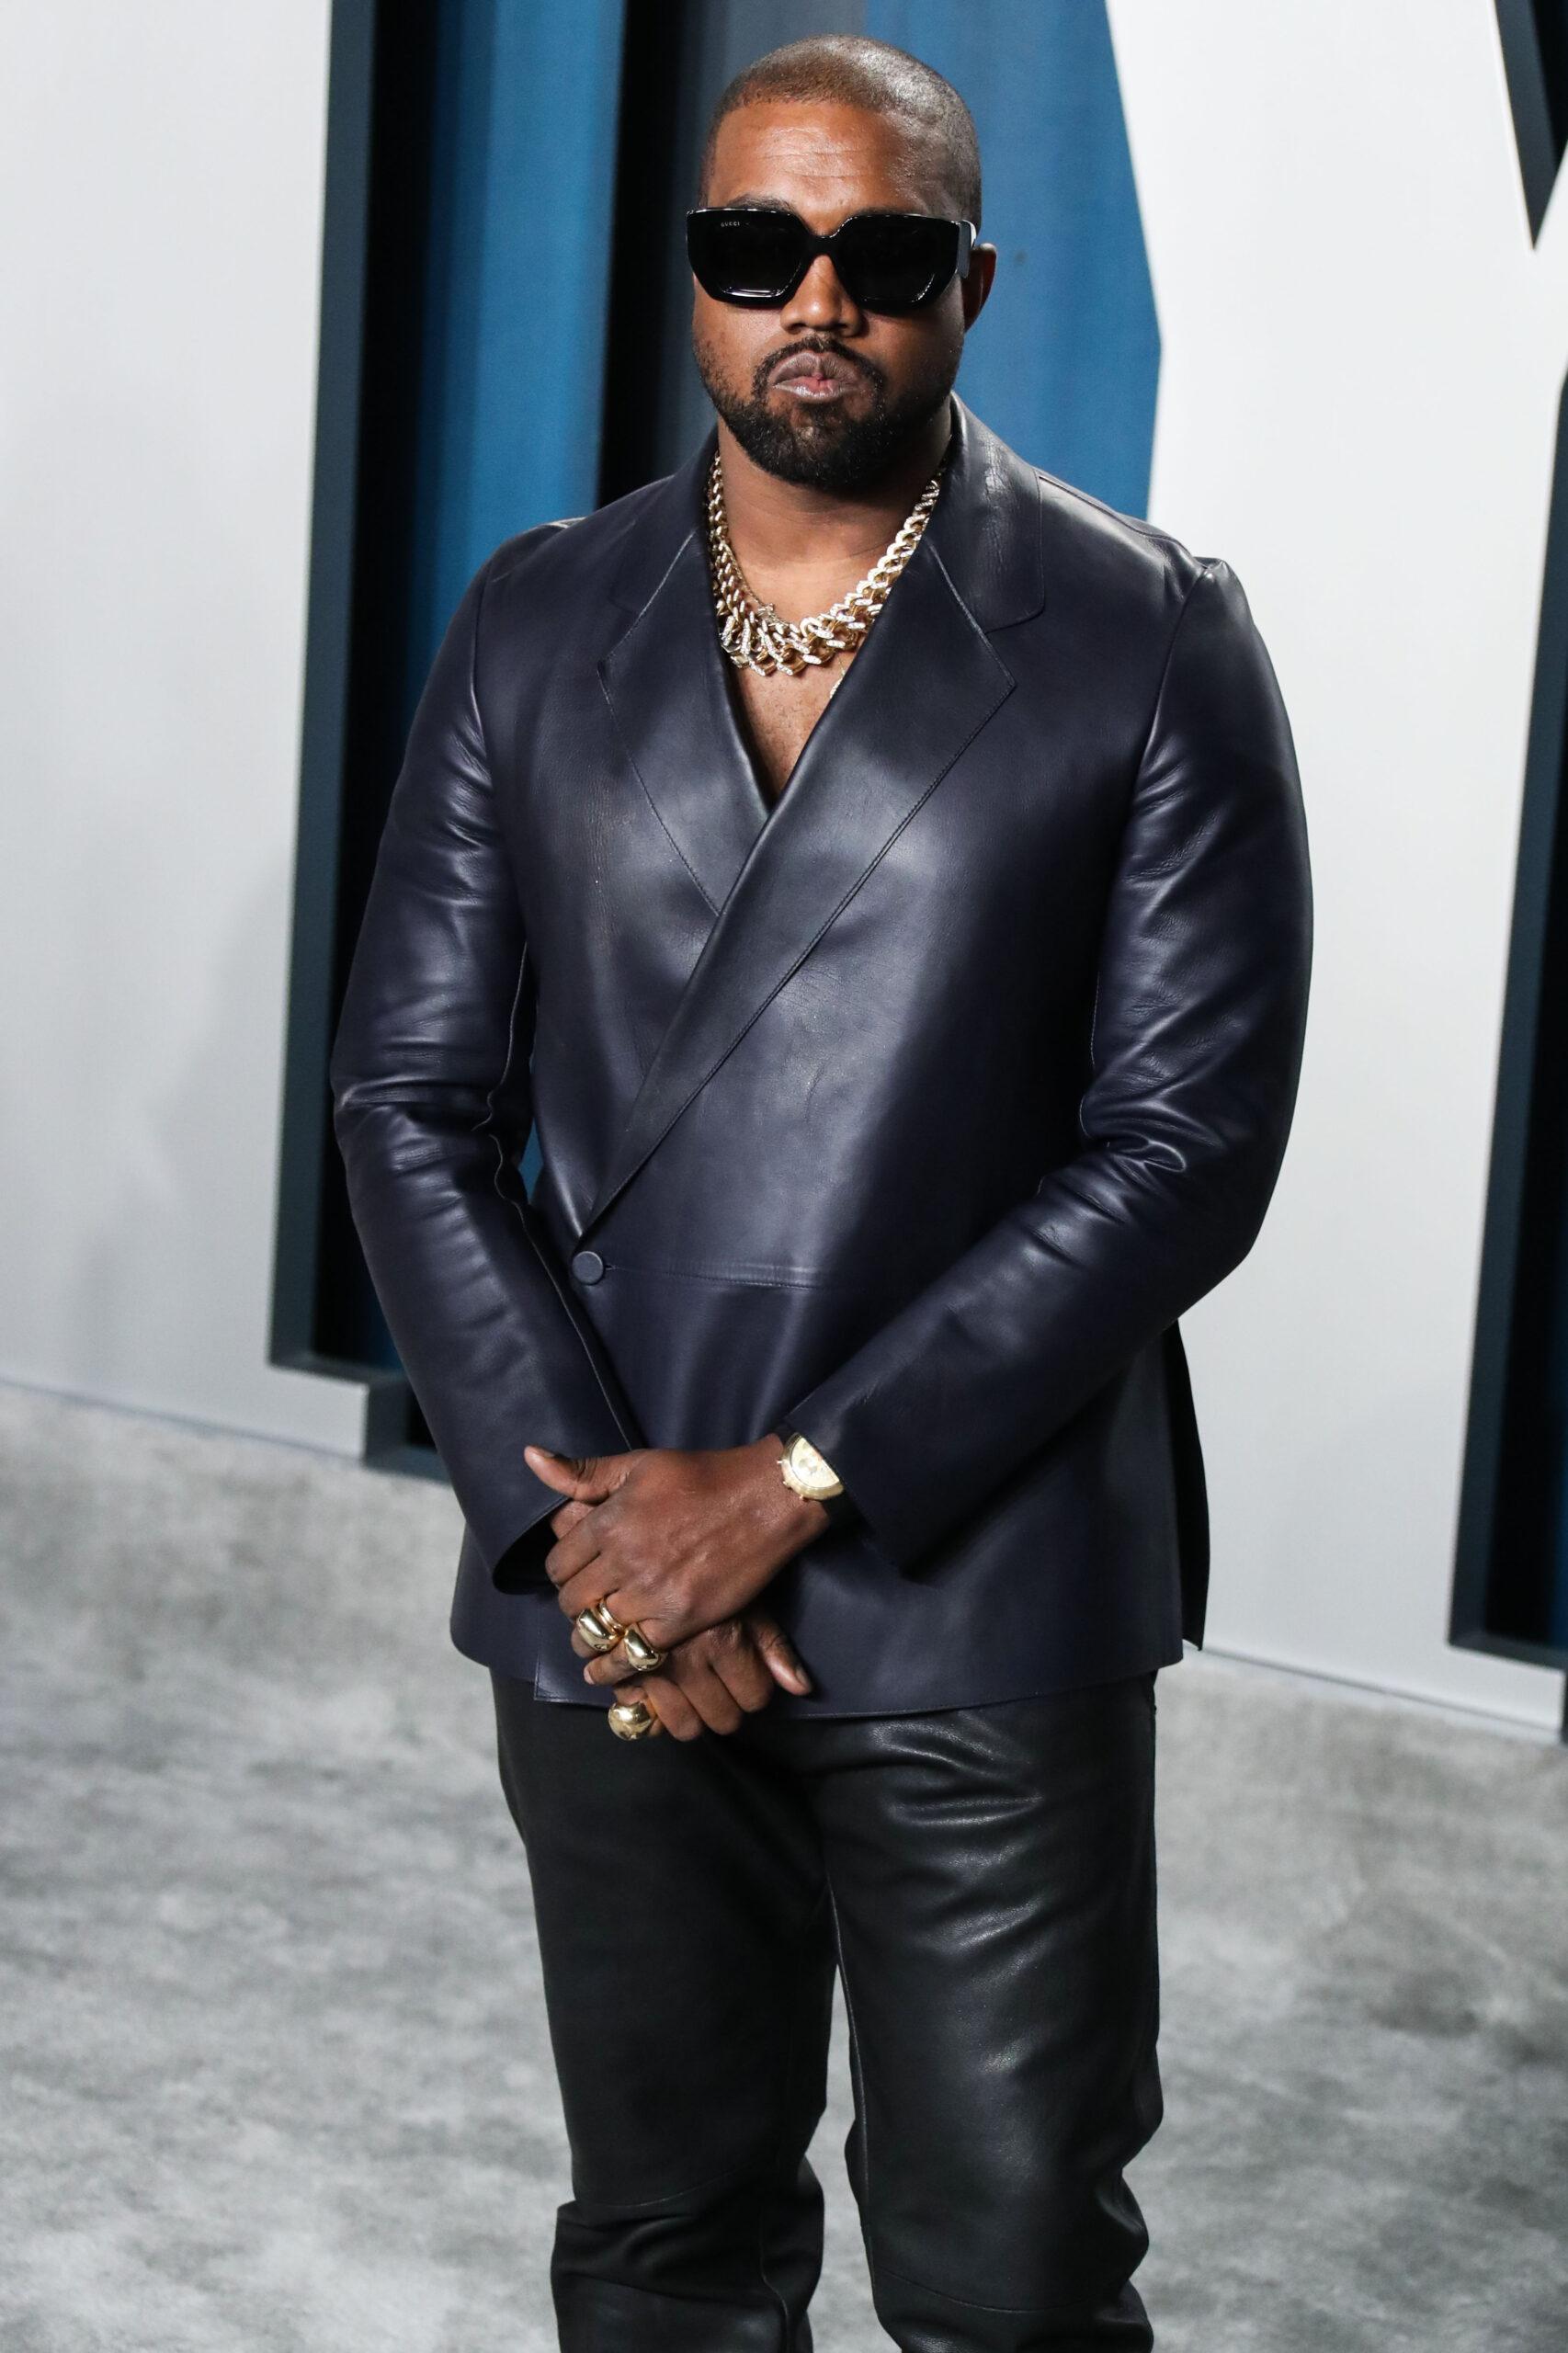 Kanye West poses at the Vanity Fair party in a black jacket and pant.